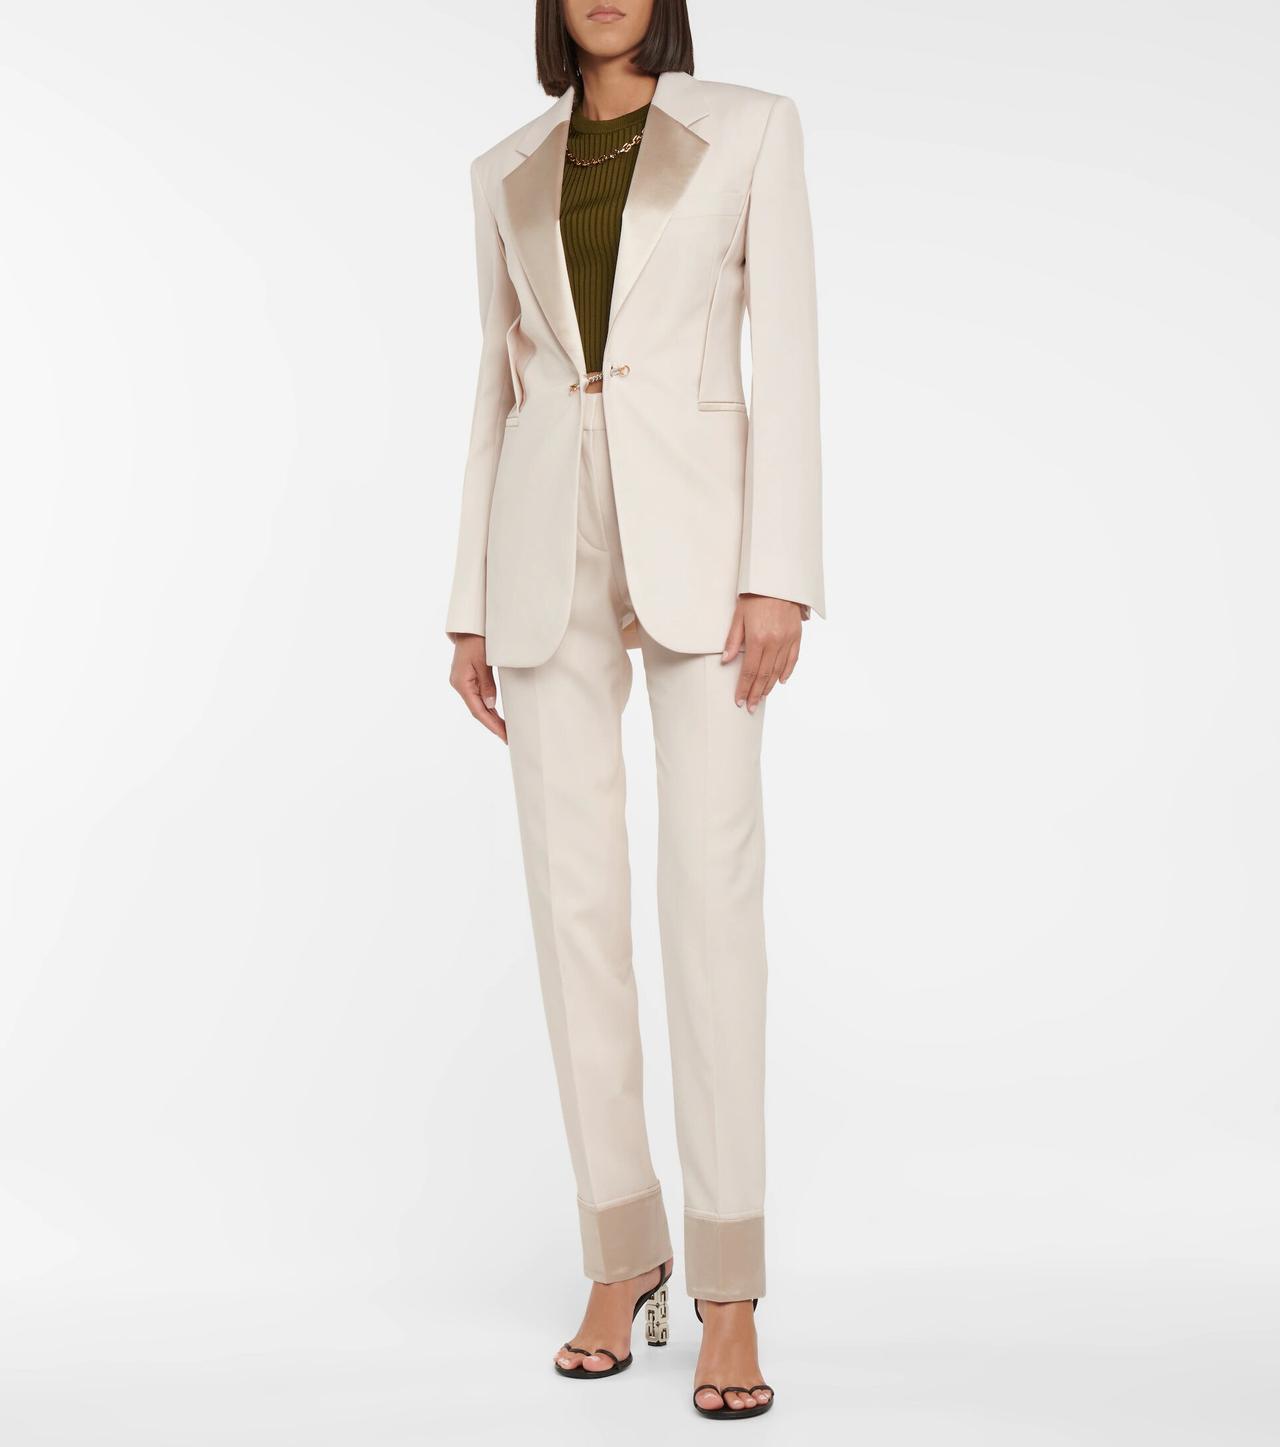 15 Elegant Trouser Suits For Female Wedding Guests